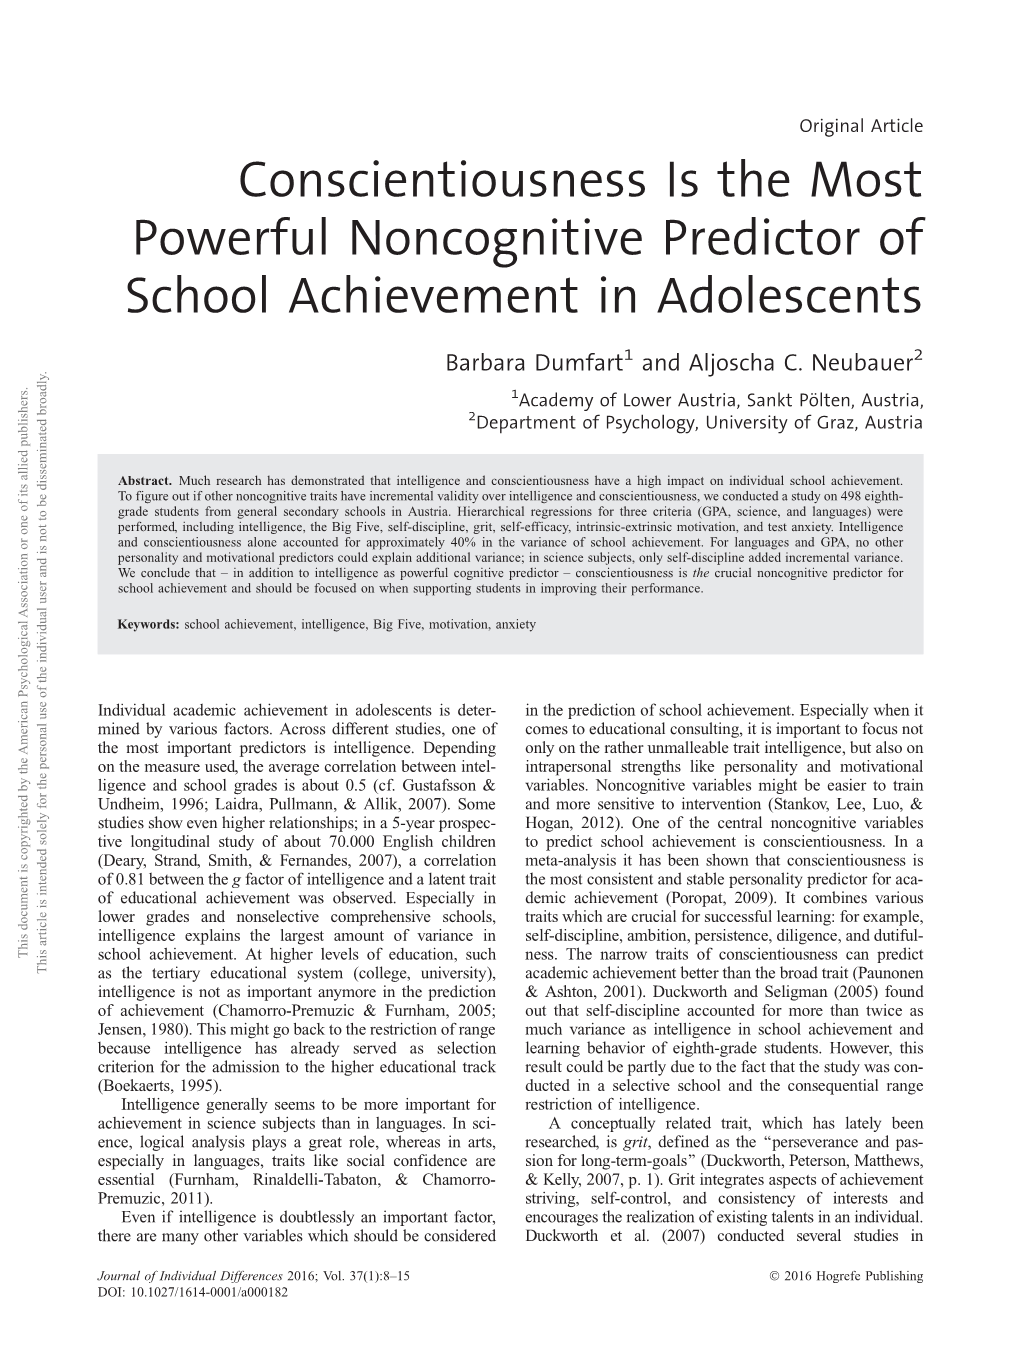 Conscientiousness Is the Most Powerful Noncognitive Predictor of School Achievement in Adolescents